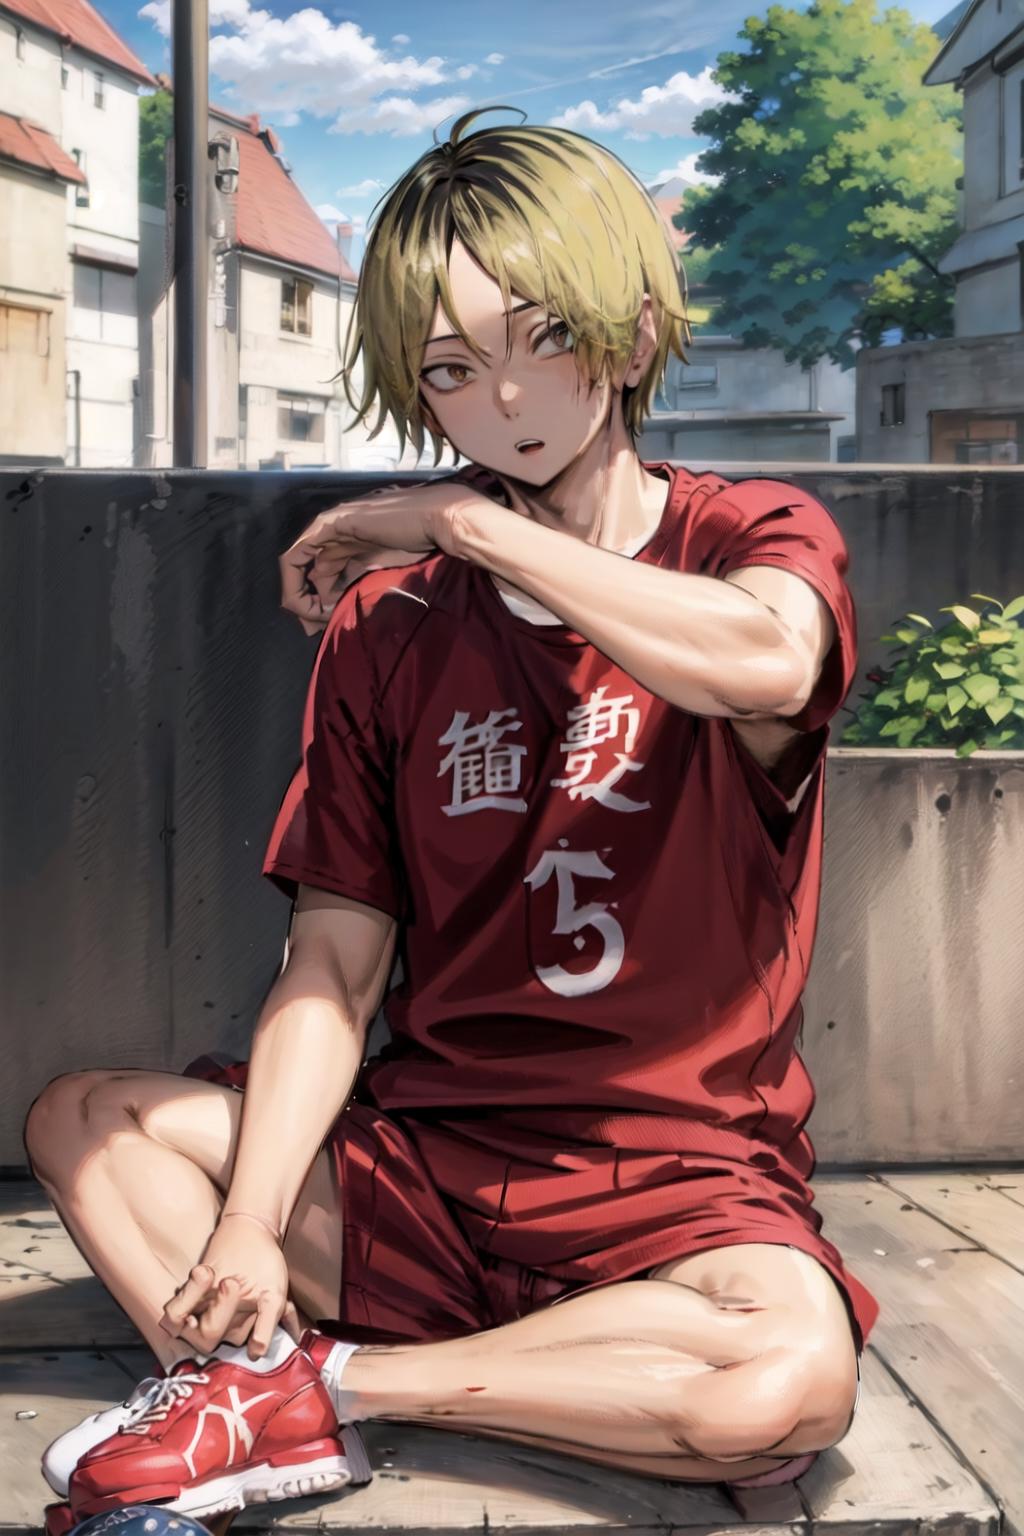 Kenma Kozume (Multiple Outfits, Anime-styled) image by SteamedHams